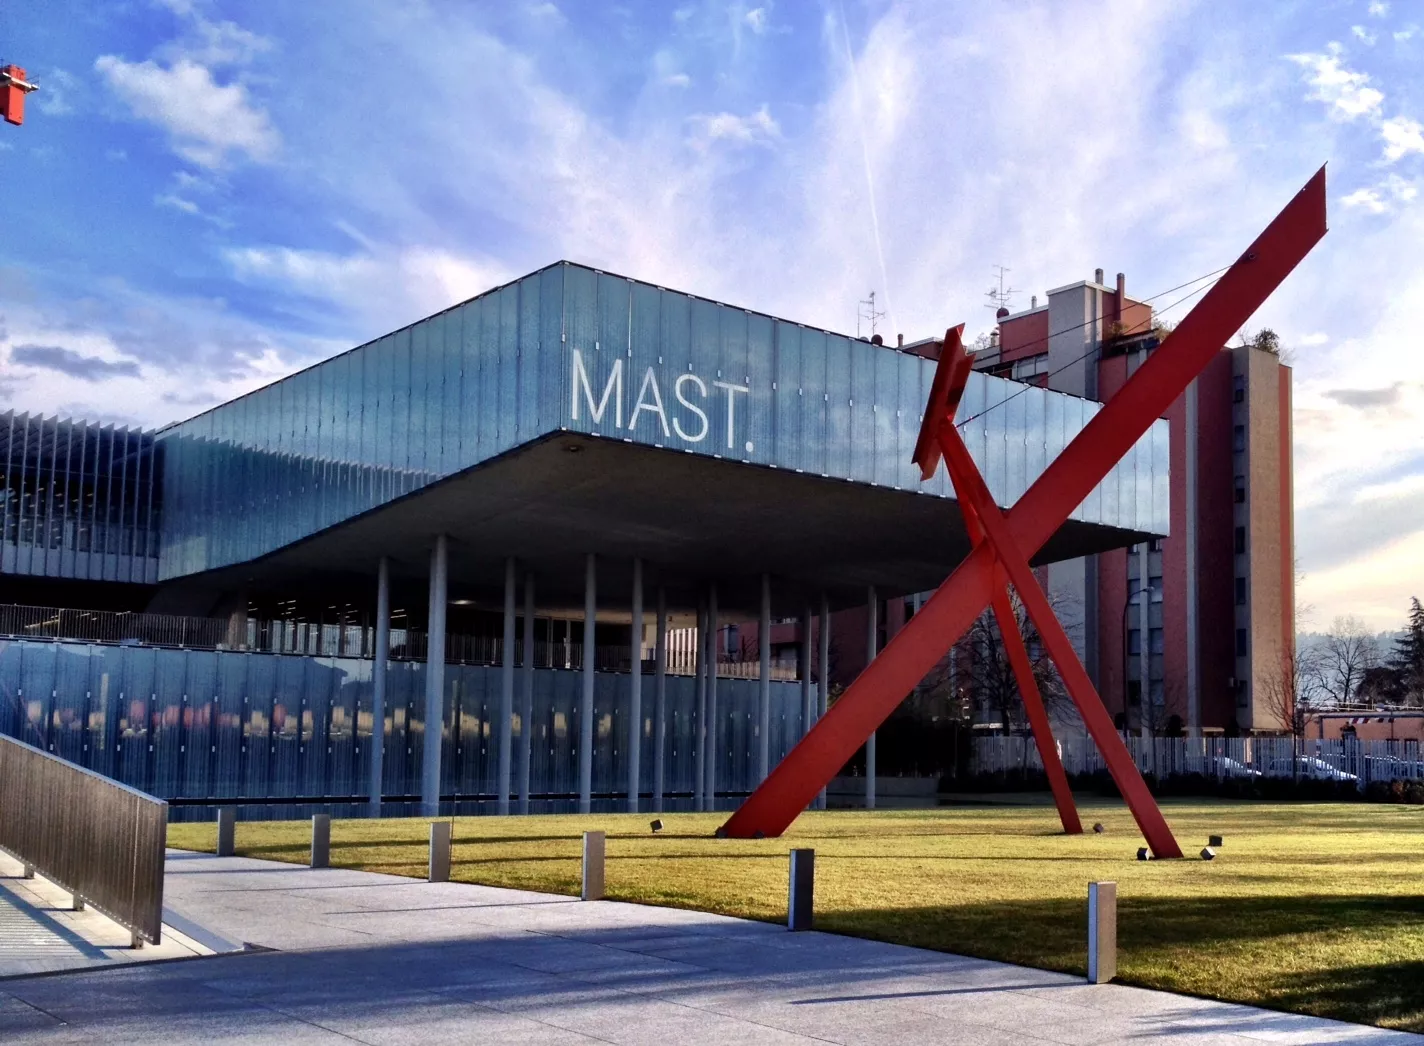 Fondazione MAST in Italy, Europe | Museums - Rated 3.9